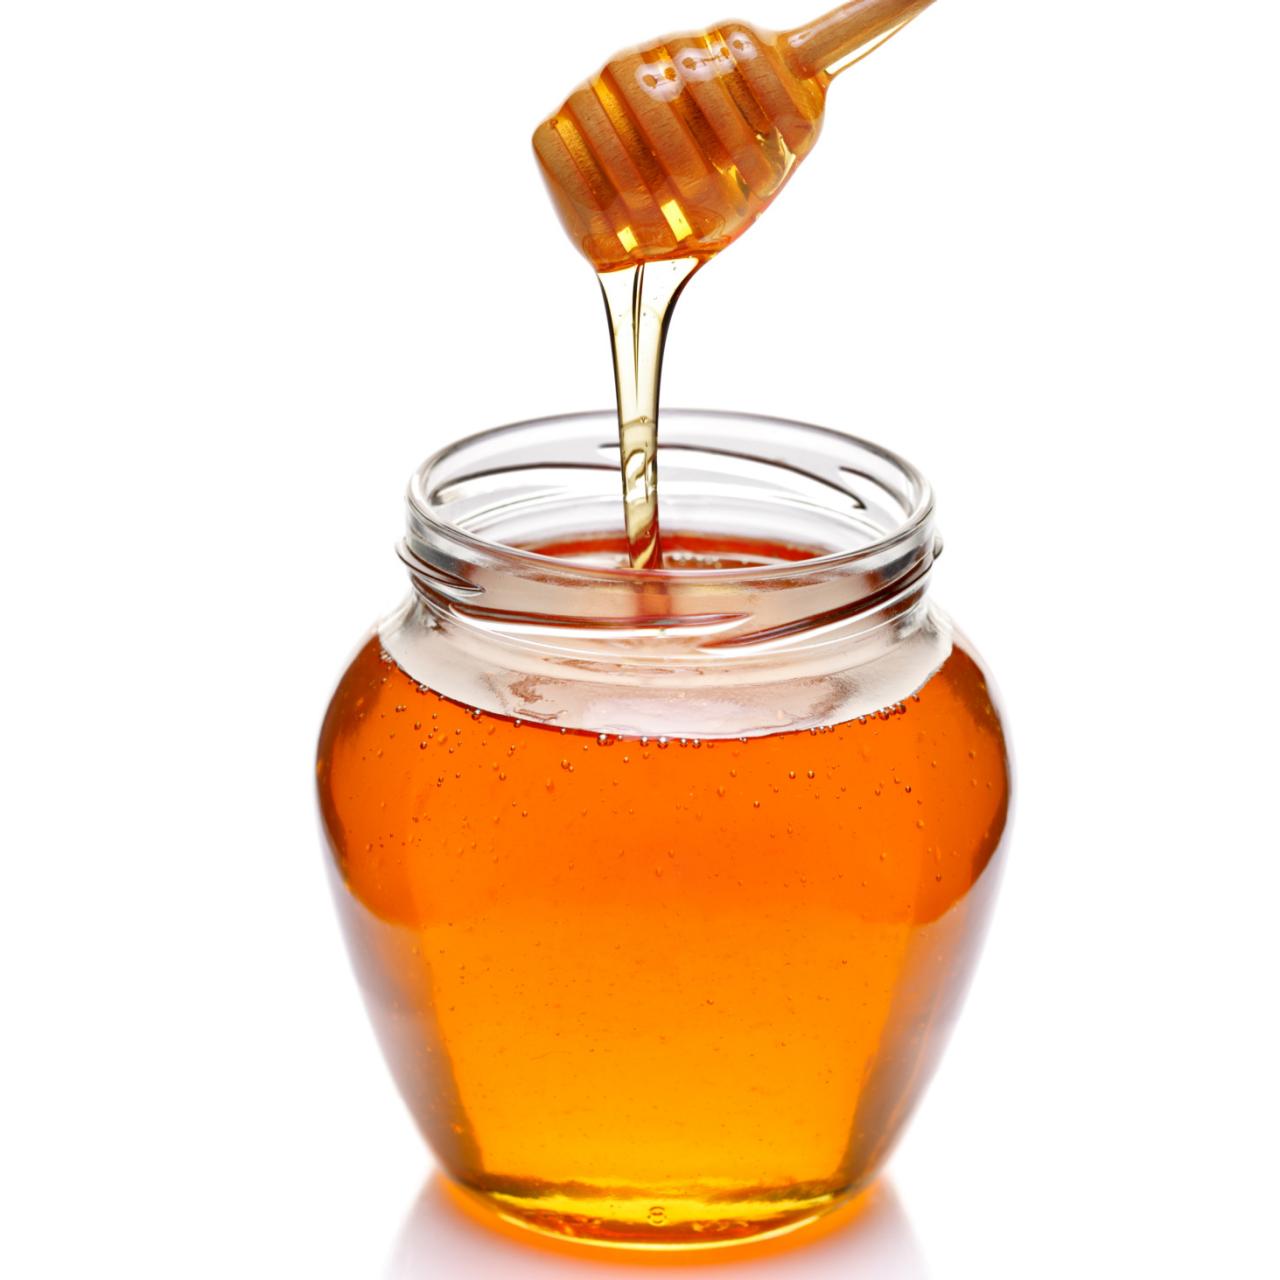 How to Soften Honey in a Bottle  Help Around the Kitchen : Food